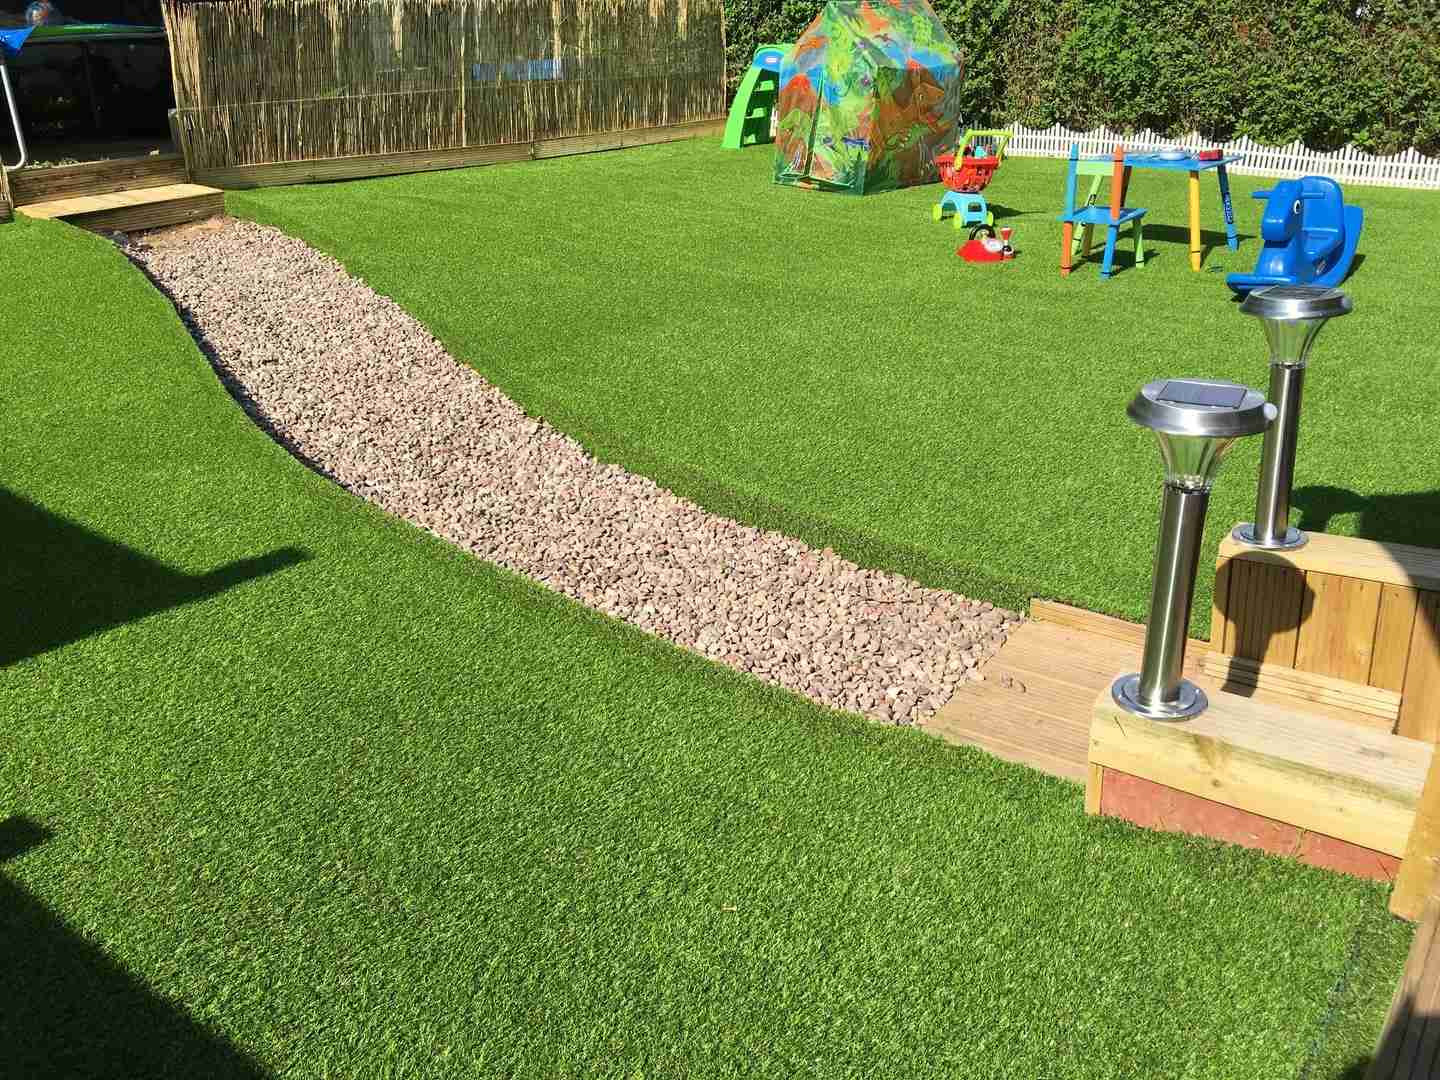 Is Artificial Grass Safe To Play On?